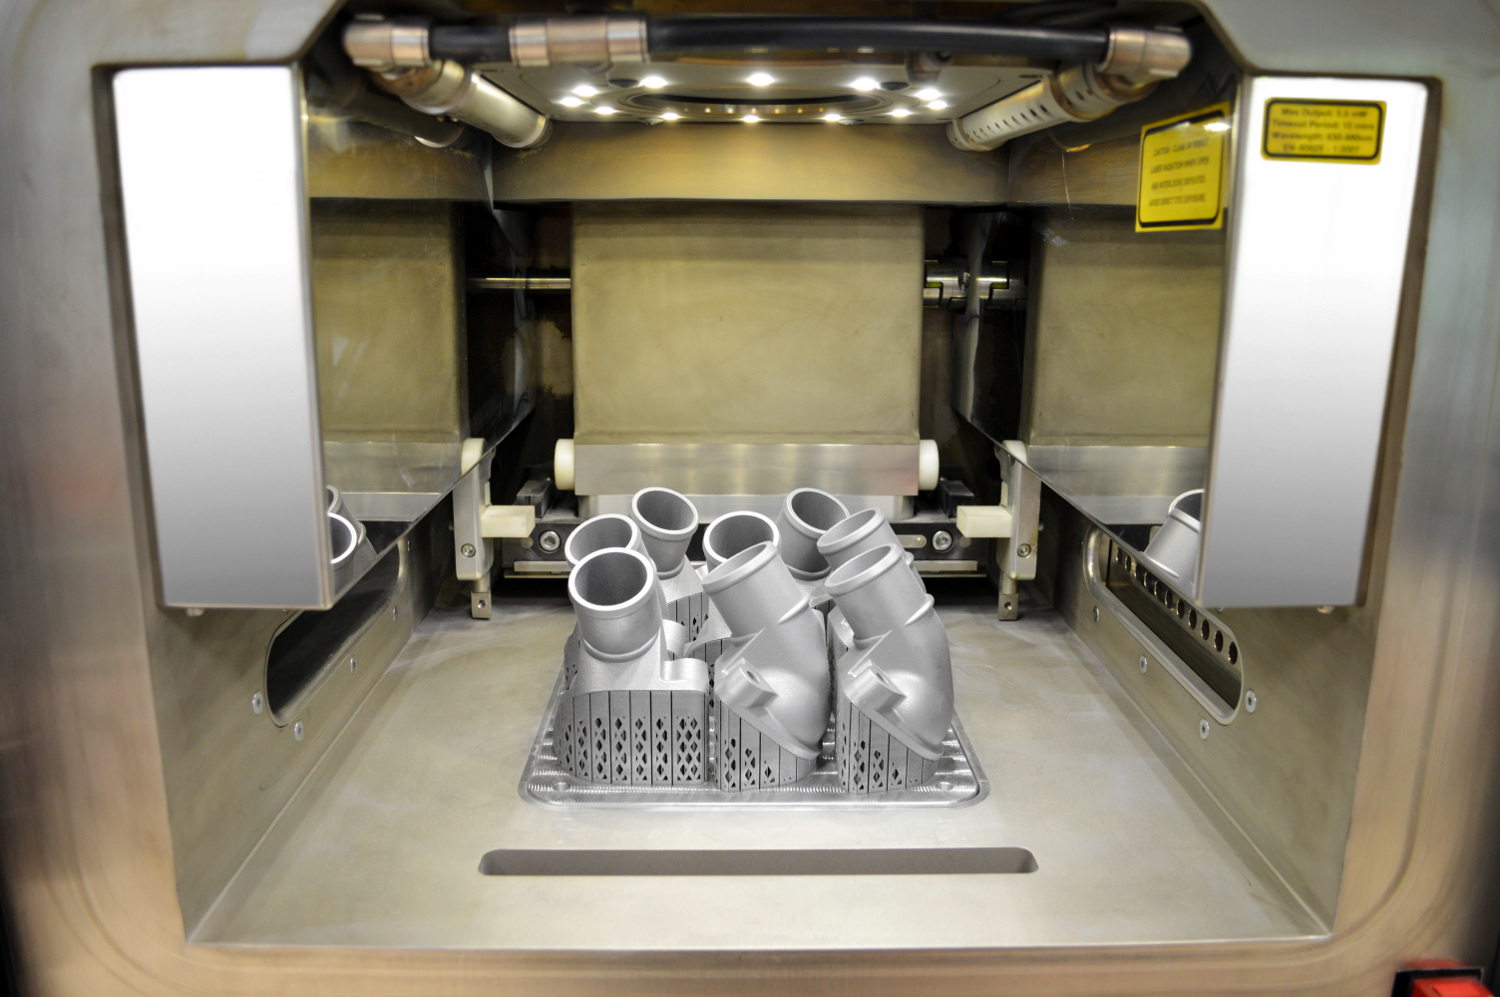 Mercedes-Benz Trucks is printing 3D parts for some of its European distributors. 3D printing could alter supply chains as businesses would not need to ship inventory or components long distances.